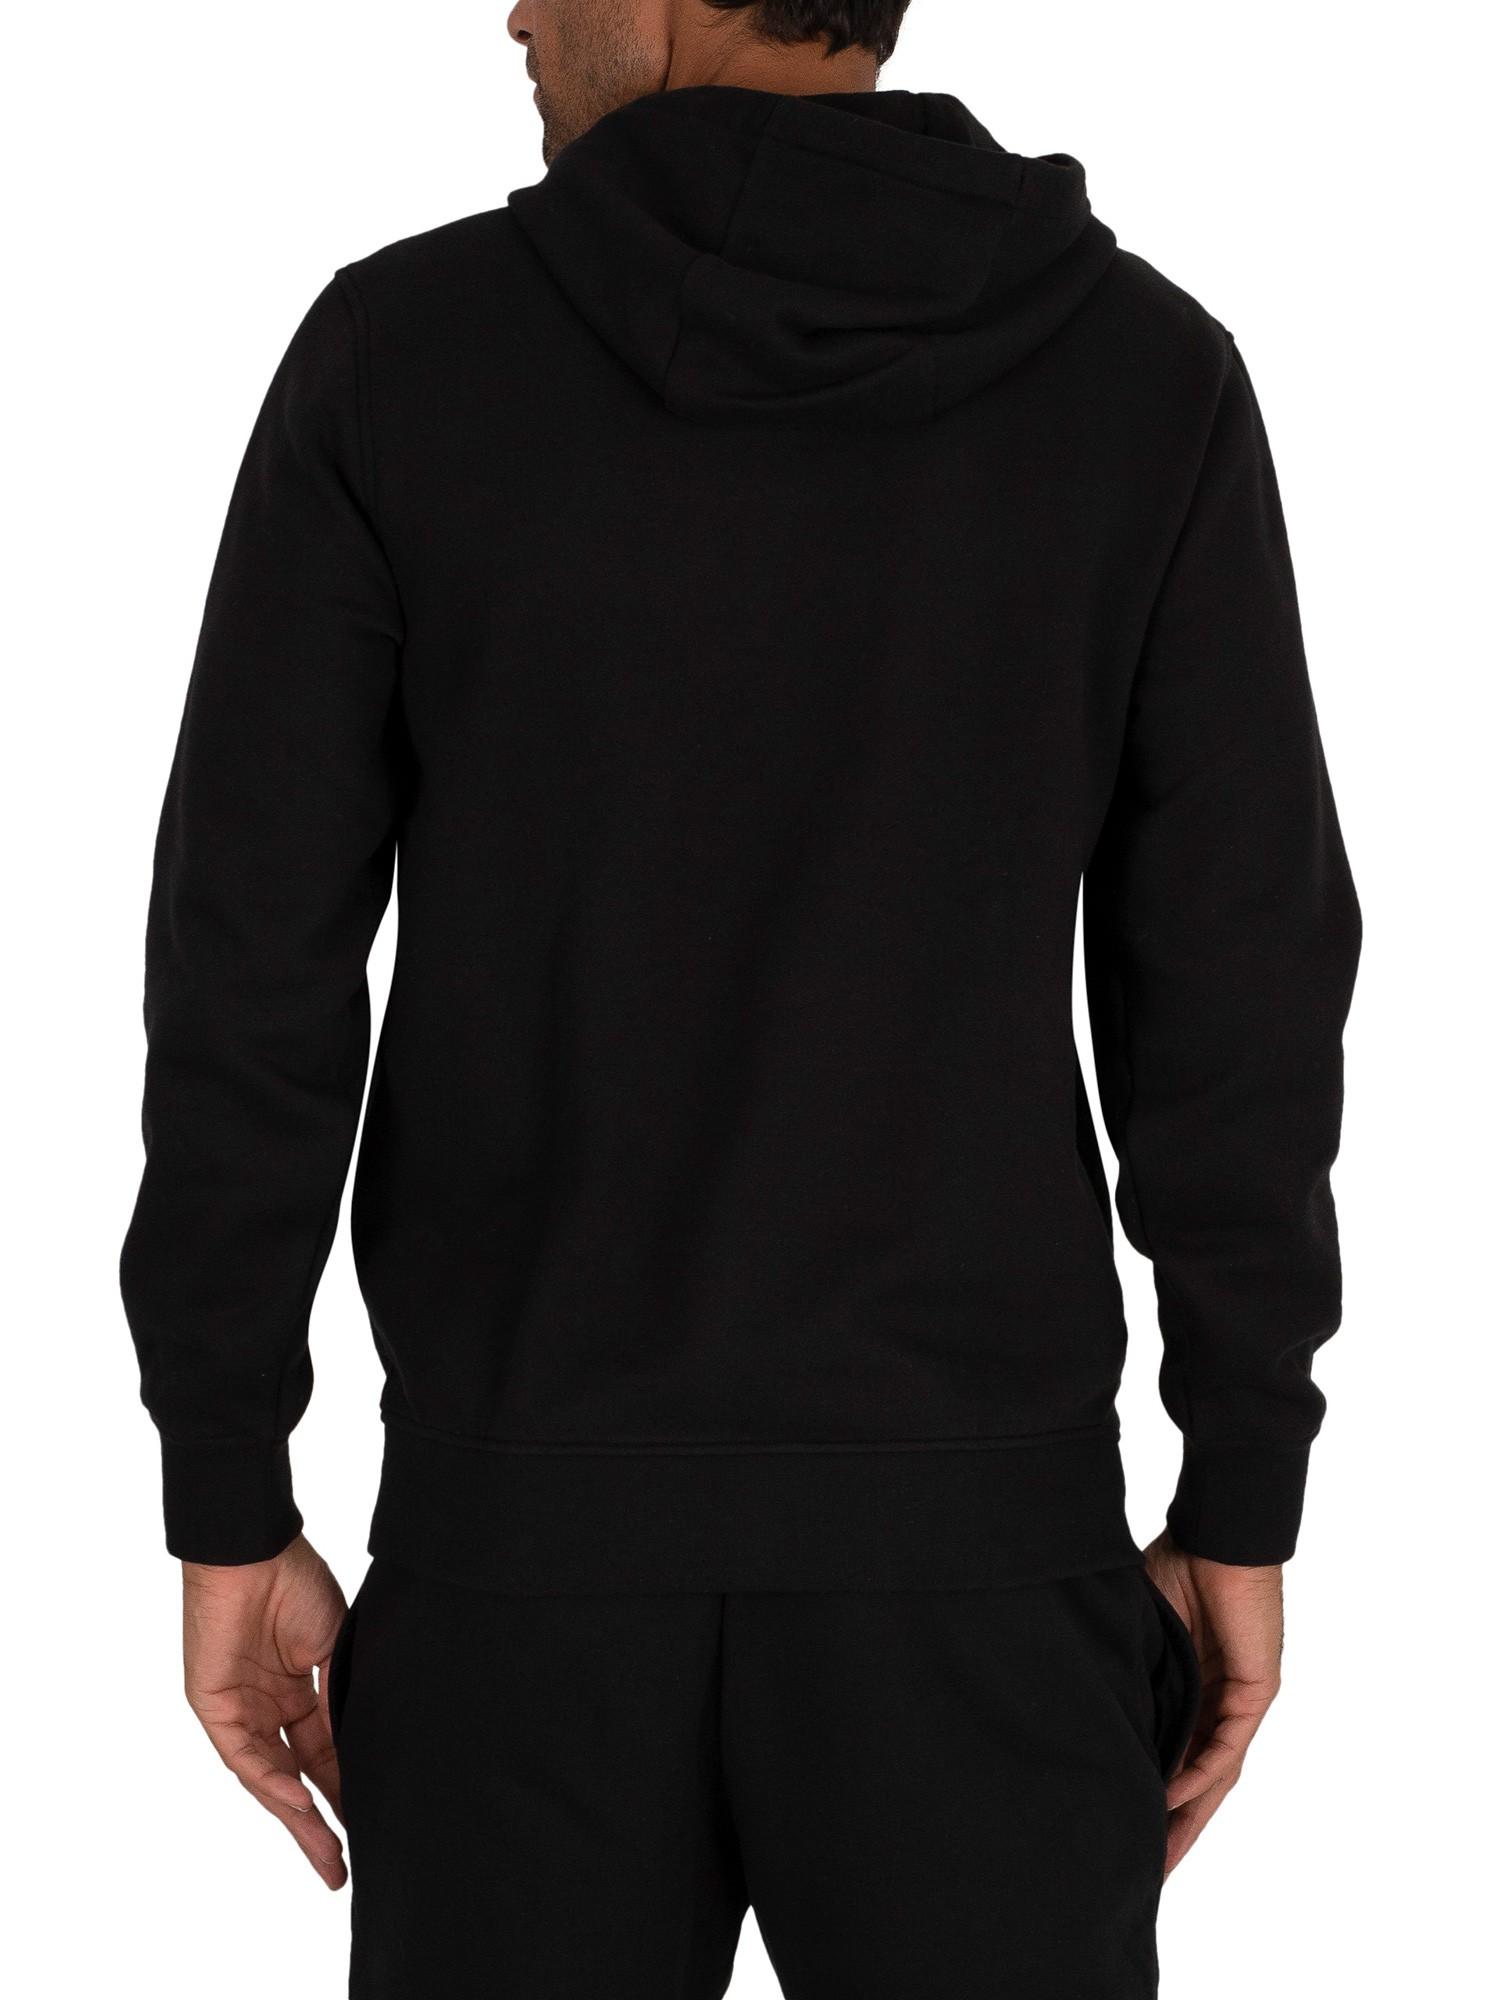 Lacoste Pullover Hoodie in Black for Men - Lyst